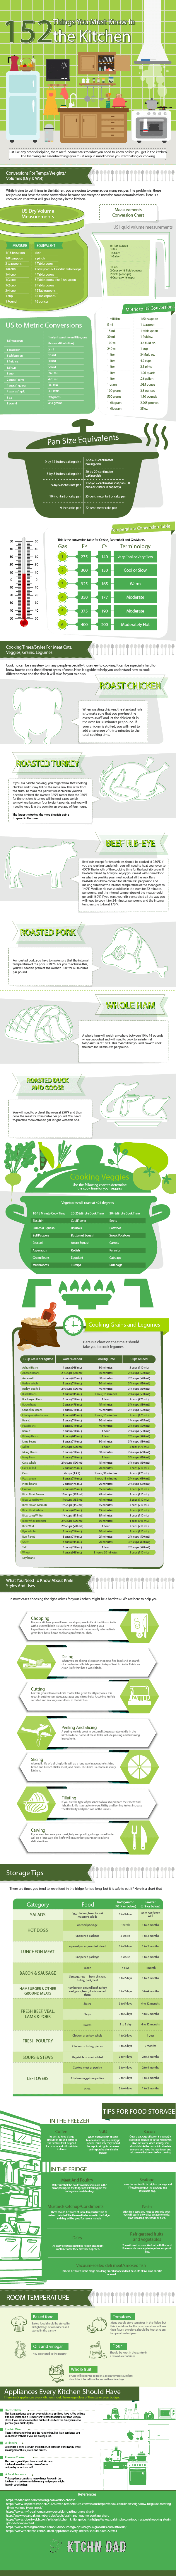 Cooking Poultry Meats Infographic Article